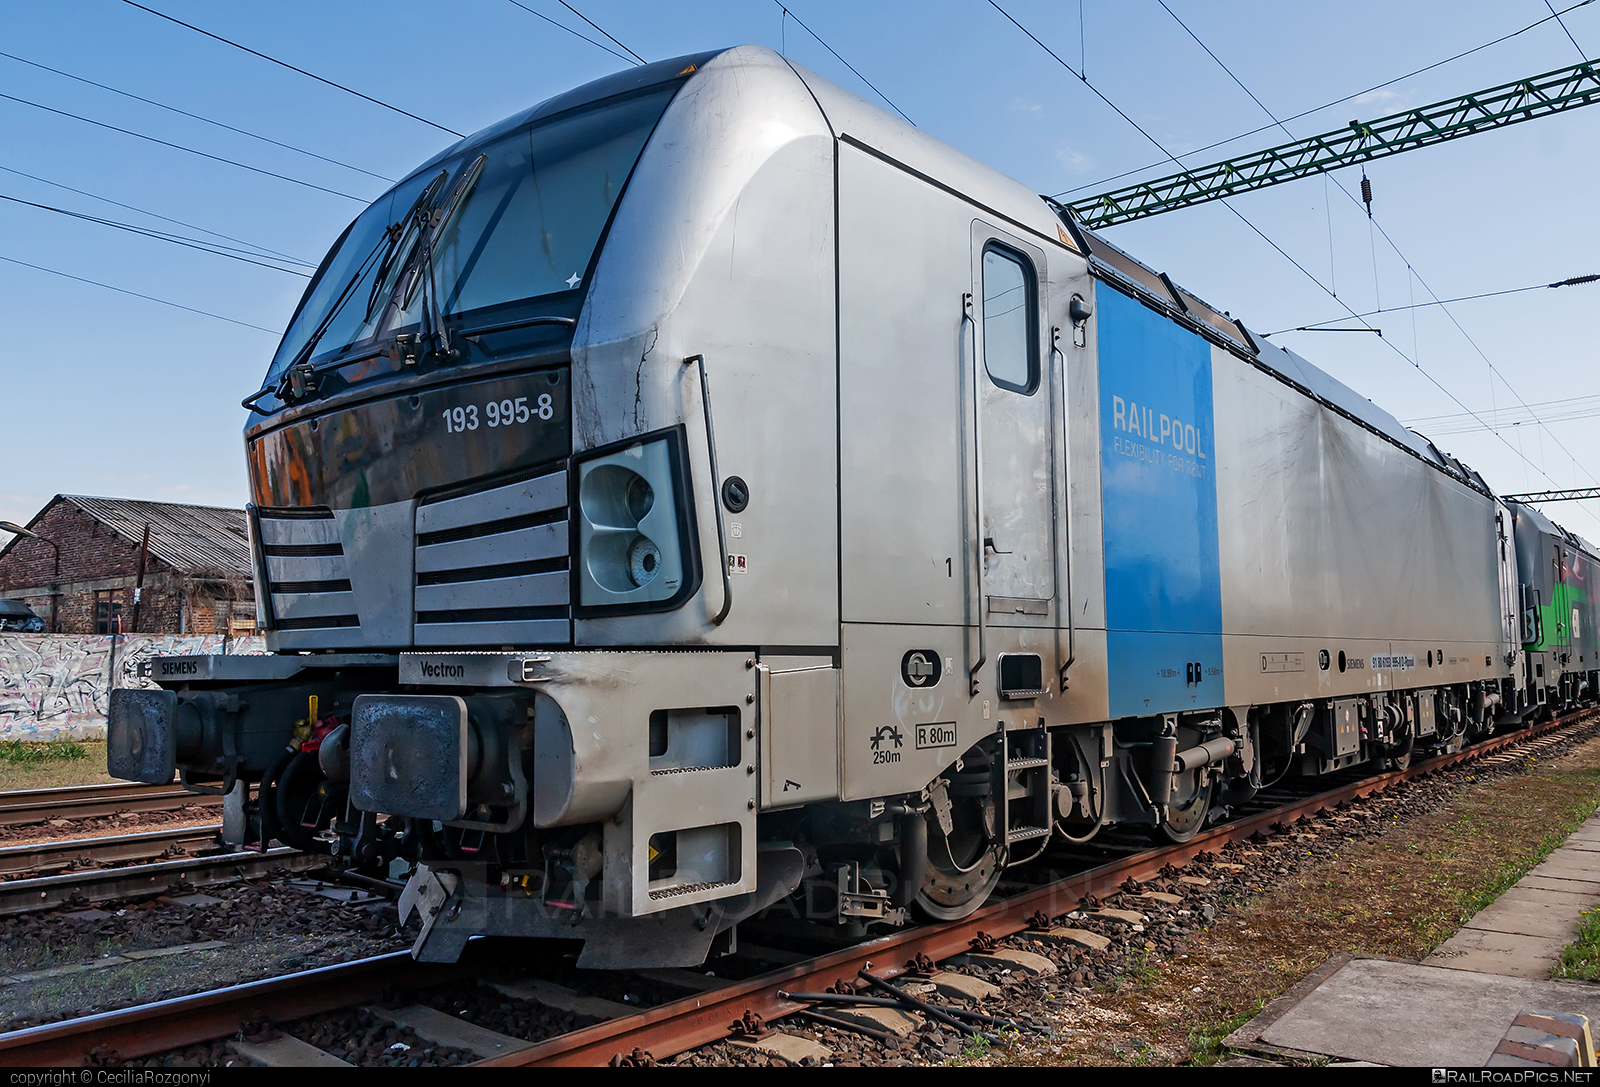 Siemens Vectron AC - 193 995-8 operated by TXLogistik #railpool #railpoolgmbh #siemens #siemensVectron #siemensVectronAC #txl #txlogistik #vectron #vectronAC